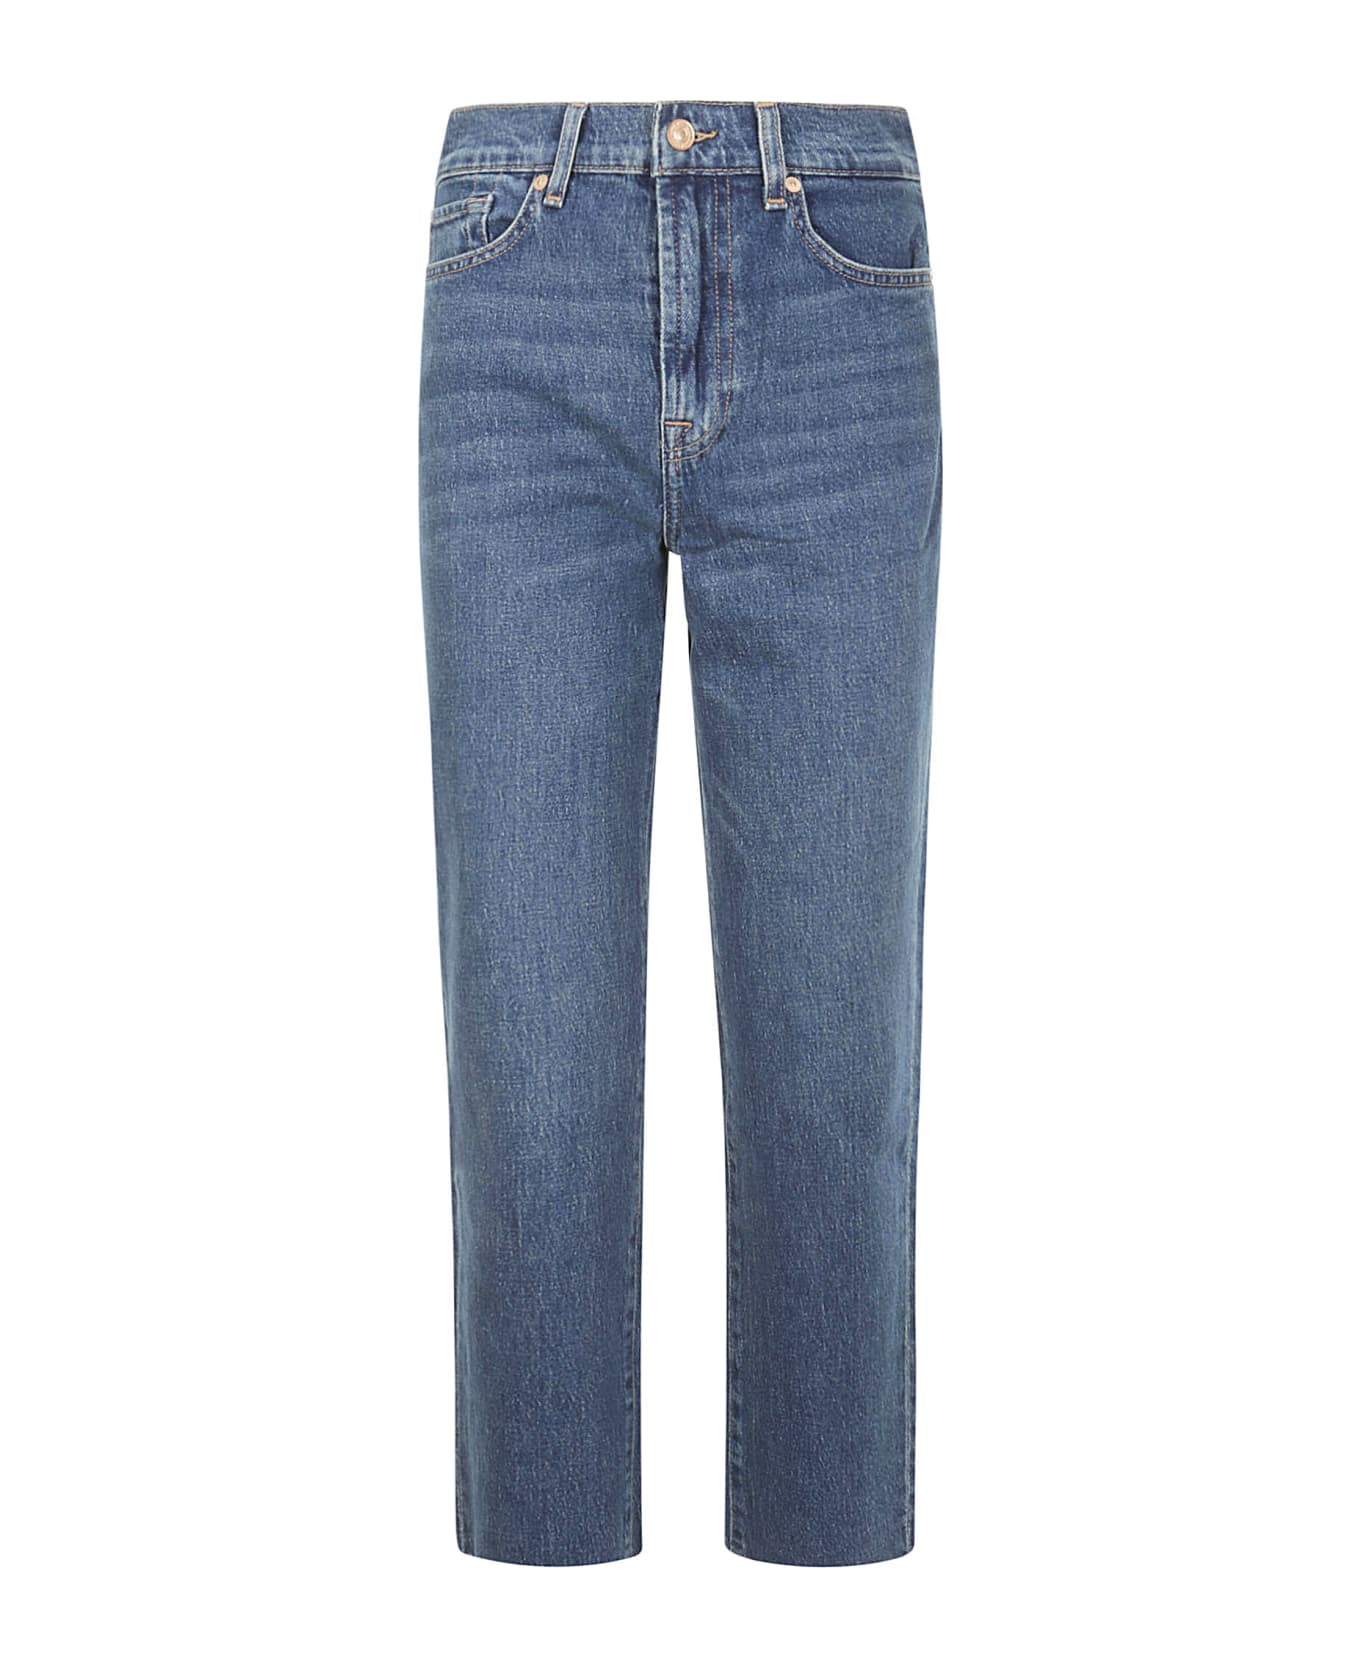 7 For All Mankind Logan Stovepipe Blue Bell - DARK BLUE